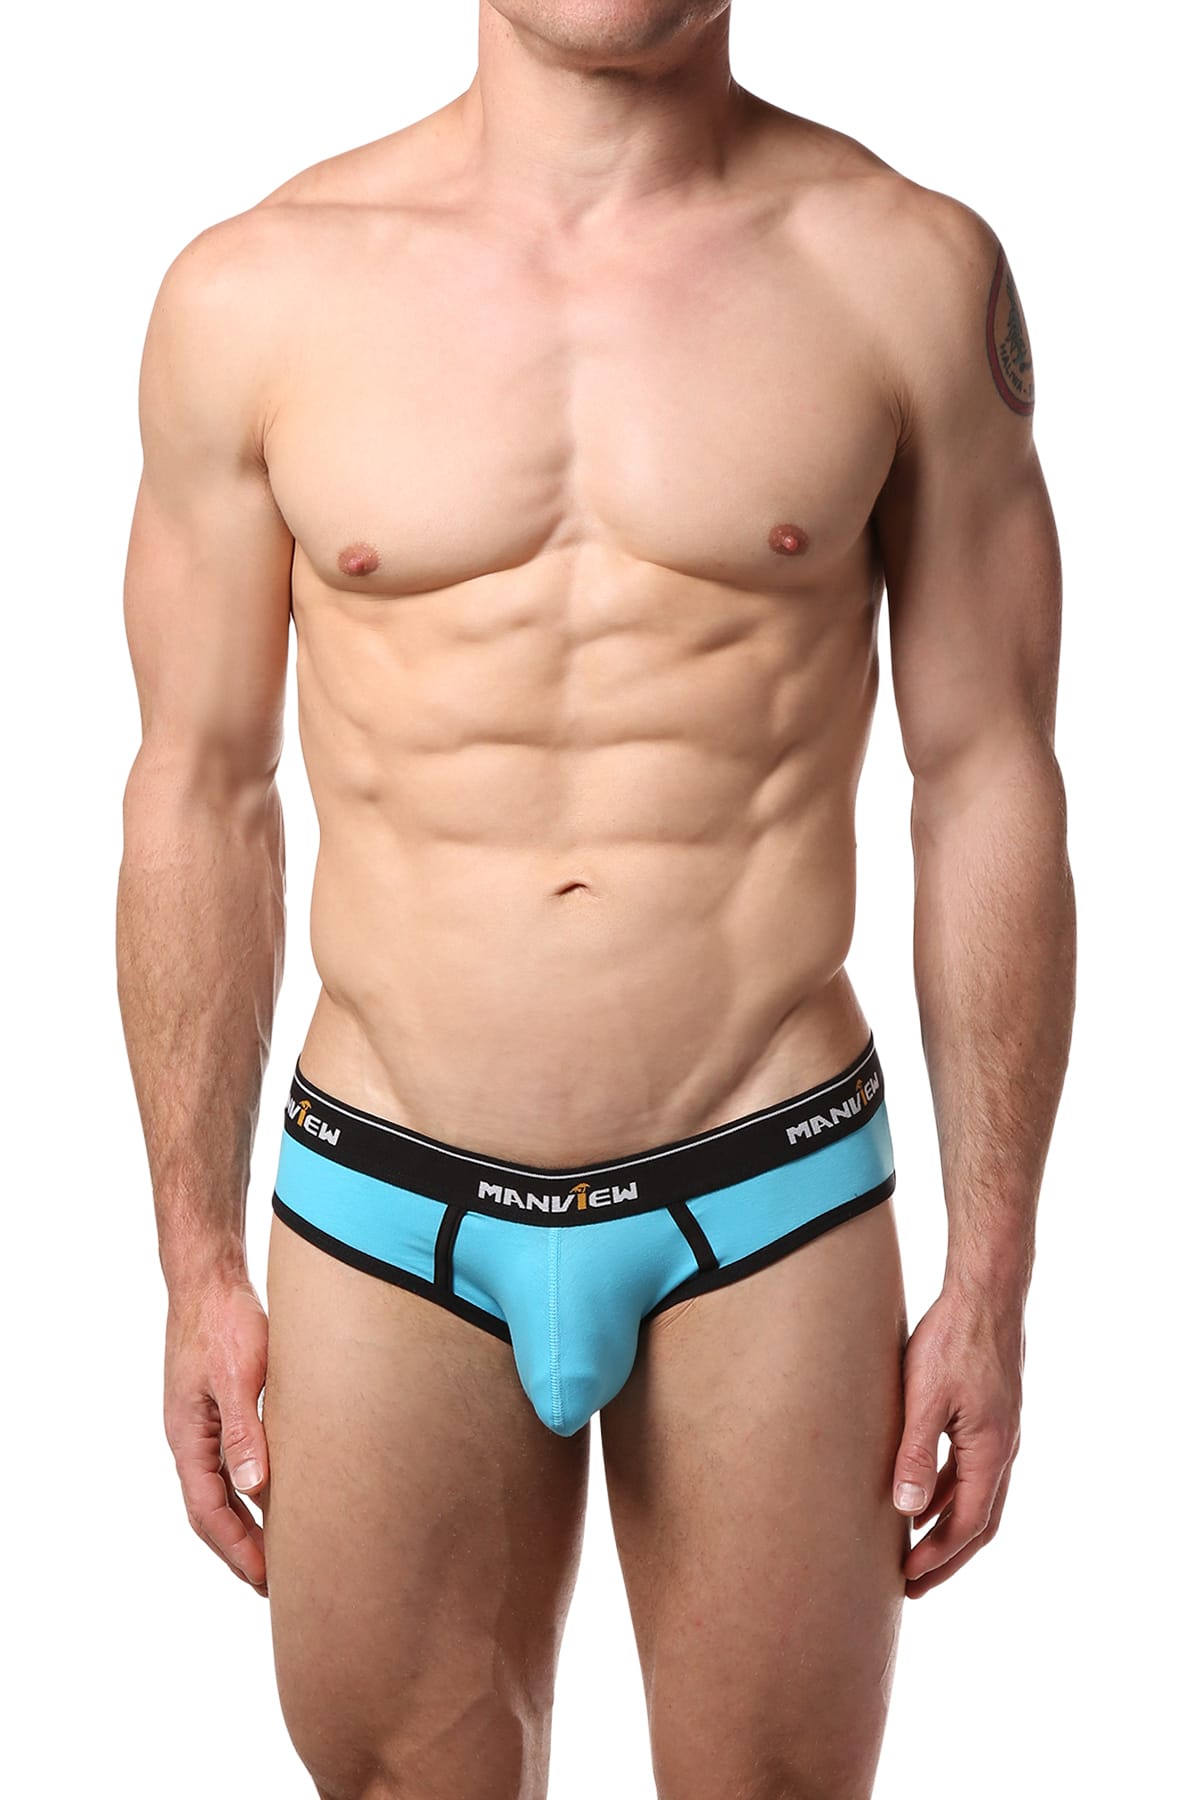 Manview Turquoise Core Basic Brief